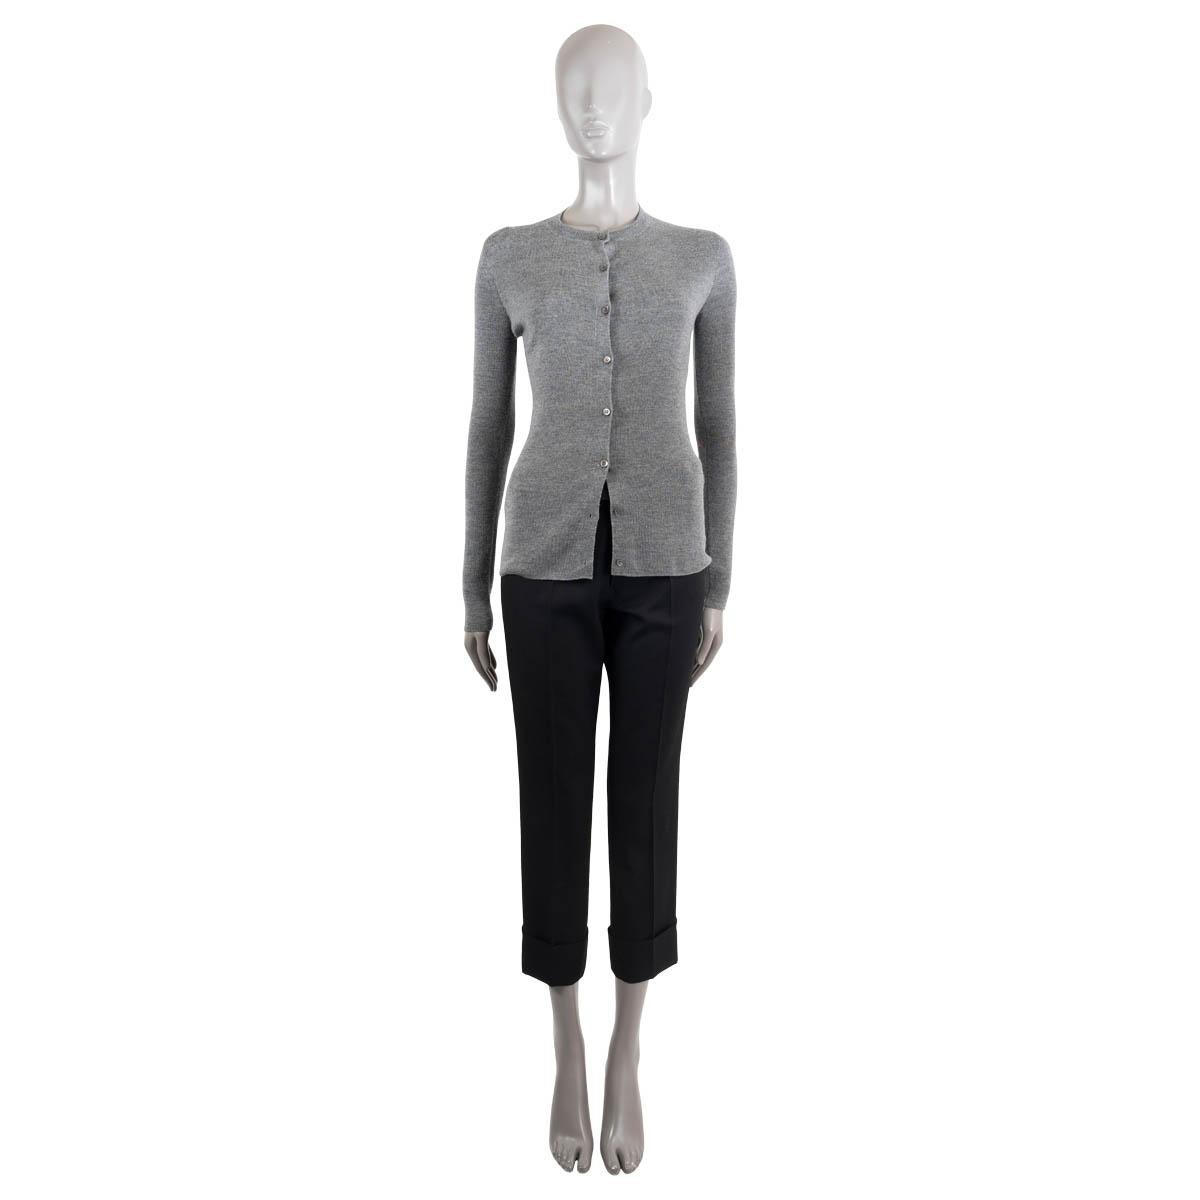 100% authentic Christian Dior cardigan in grey wool (70%) and silk (30%). Closes with buttons on the front. Unlined. Has been worn and is in excellent condition.

2015 Pre-Fall 

See separate listing for matching sweater